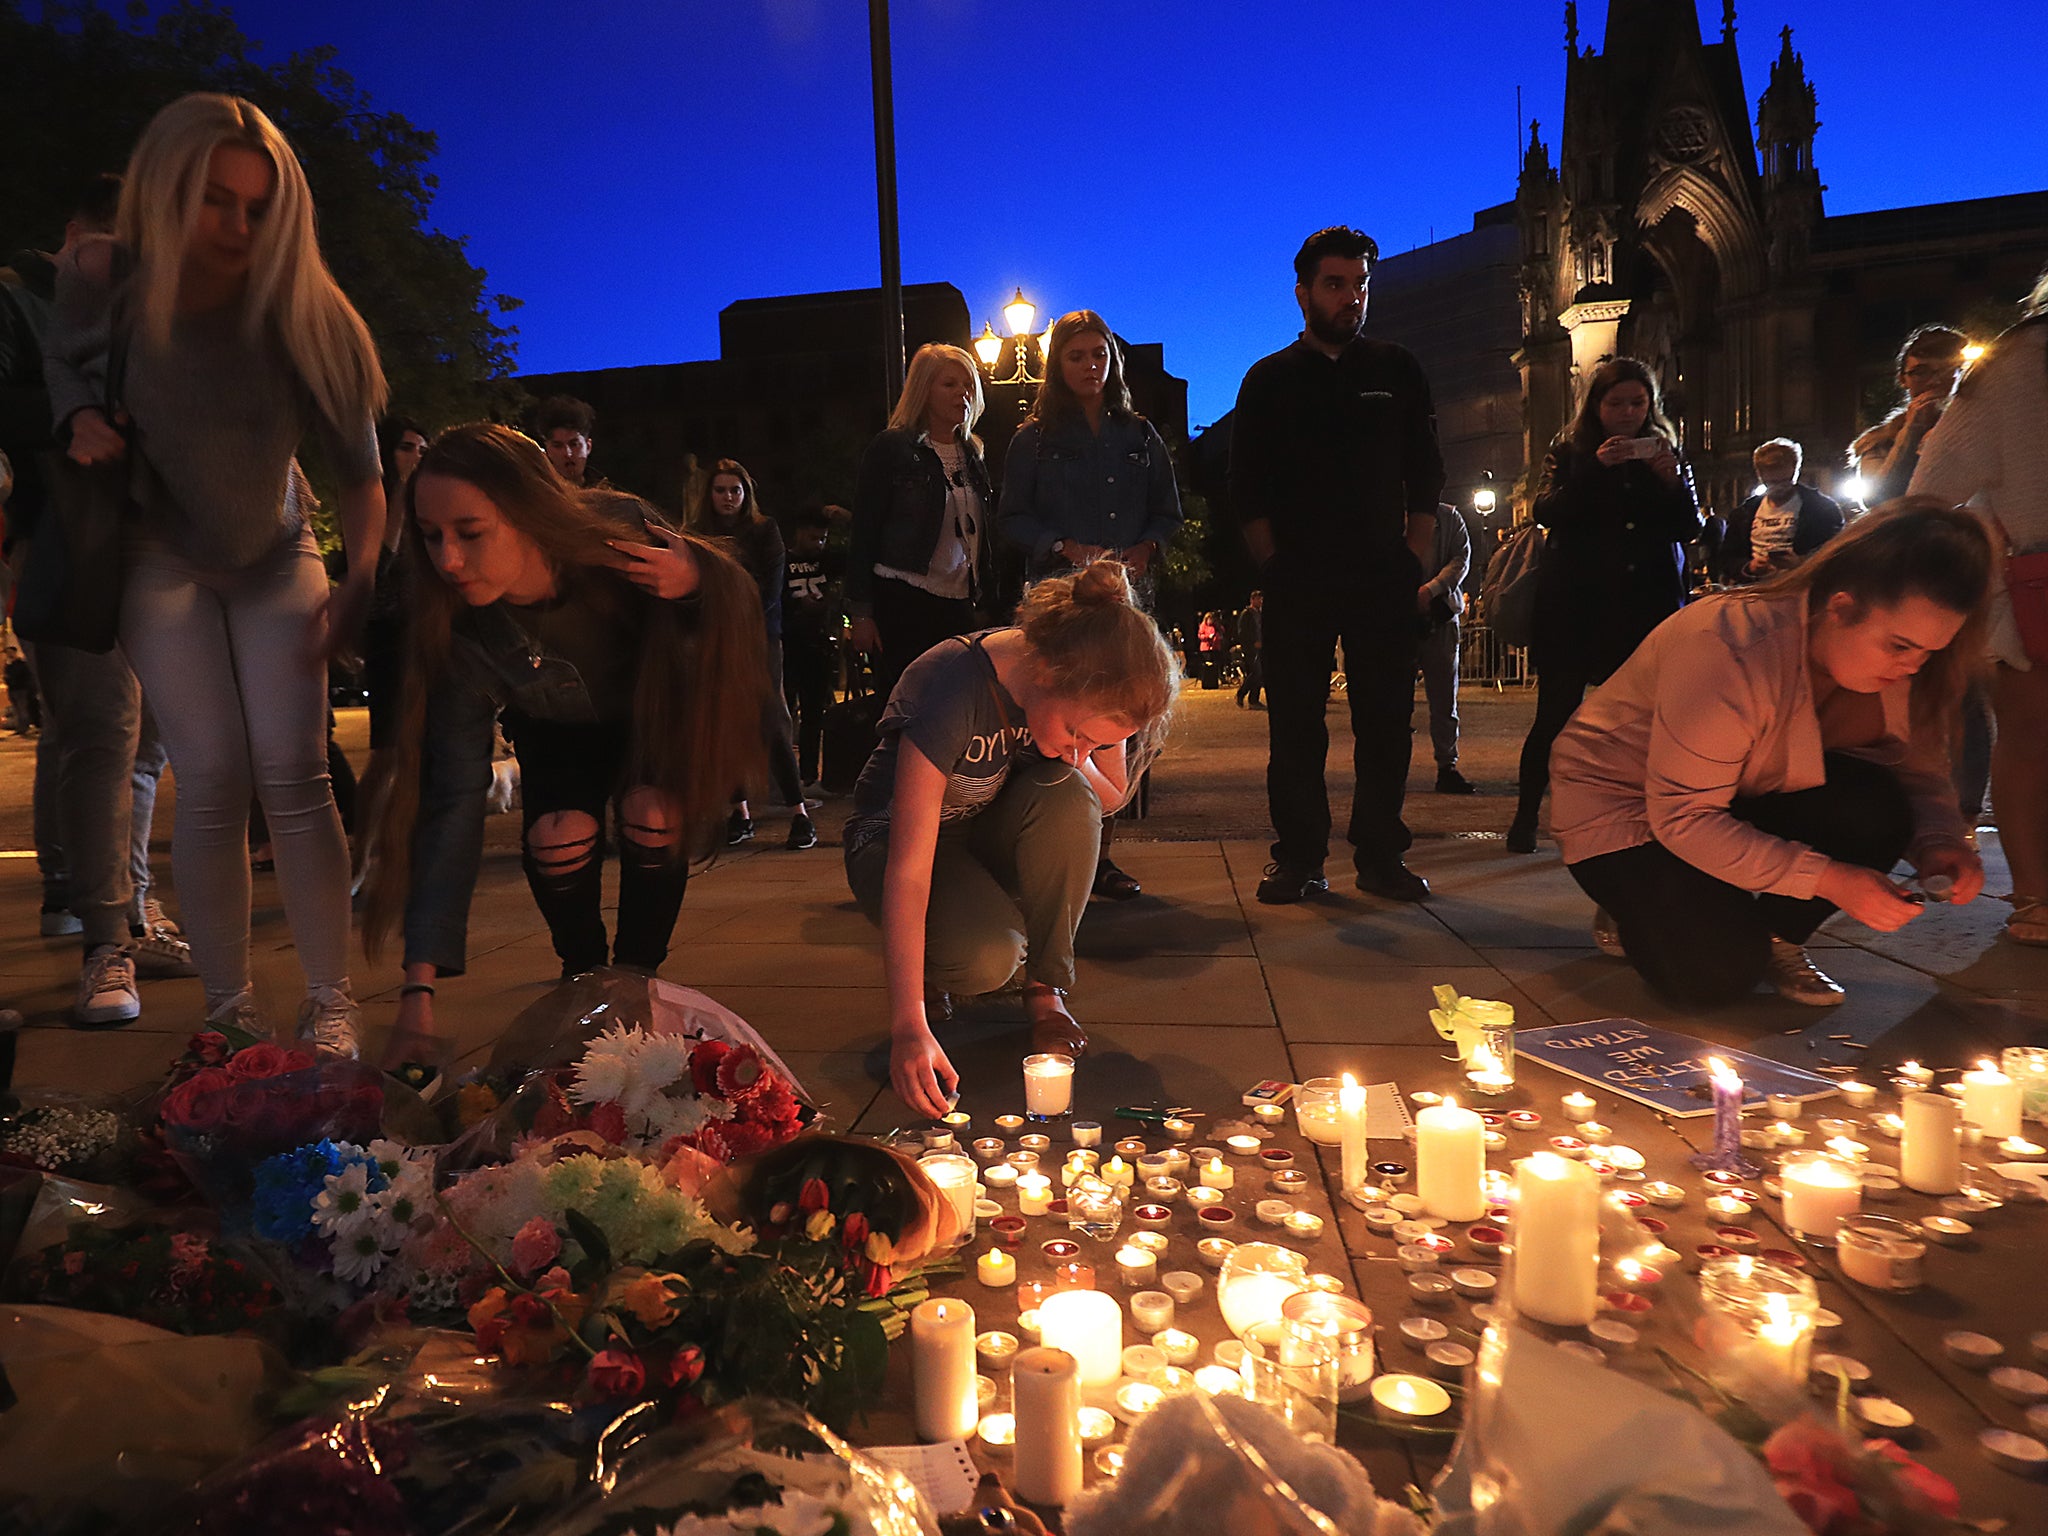 The Manchester attack was an assault on young women celebrating their freedom and ...2048 x 1536